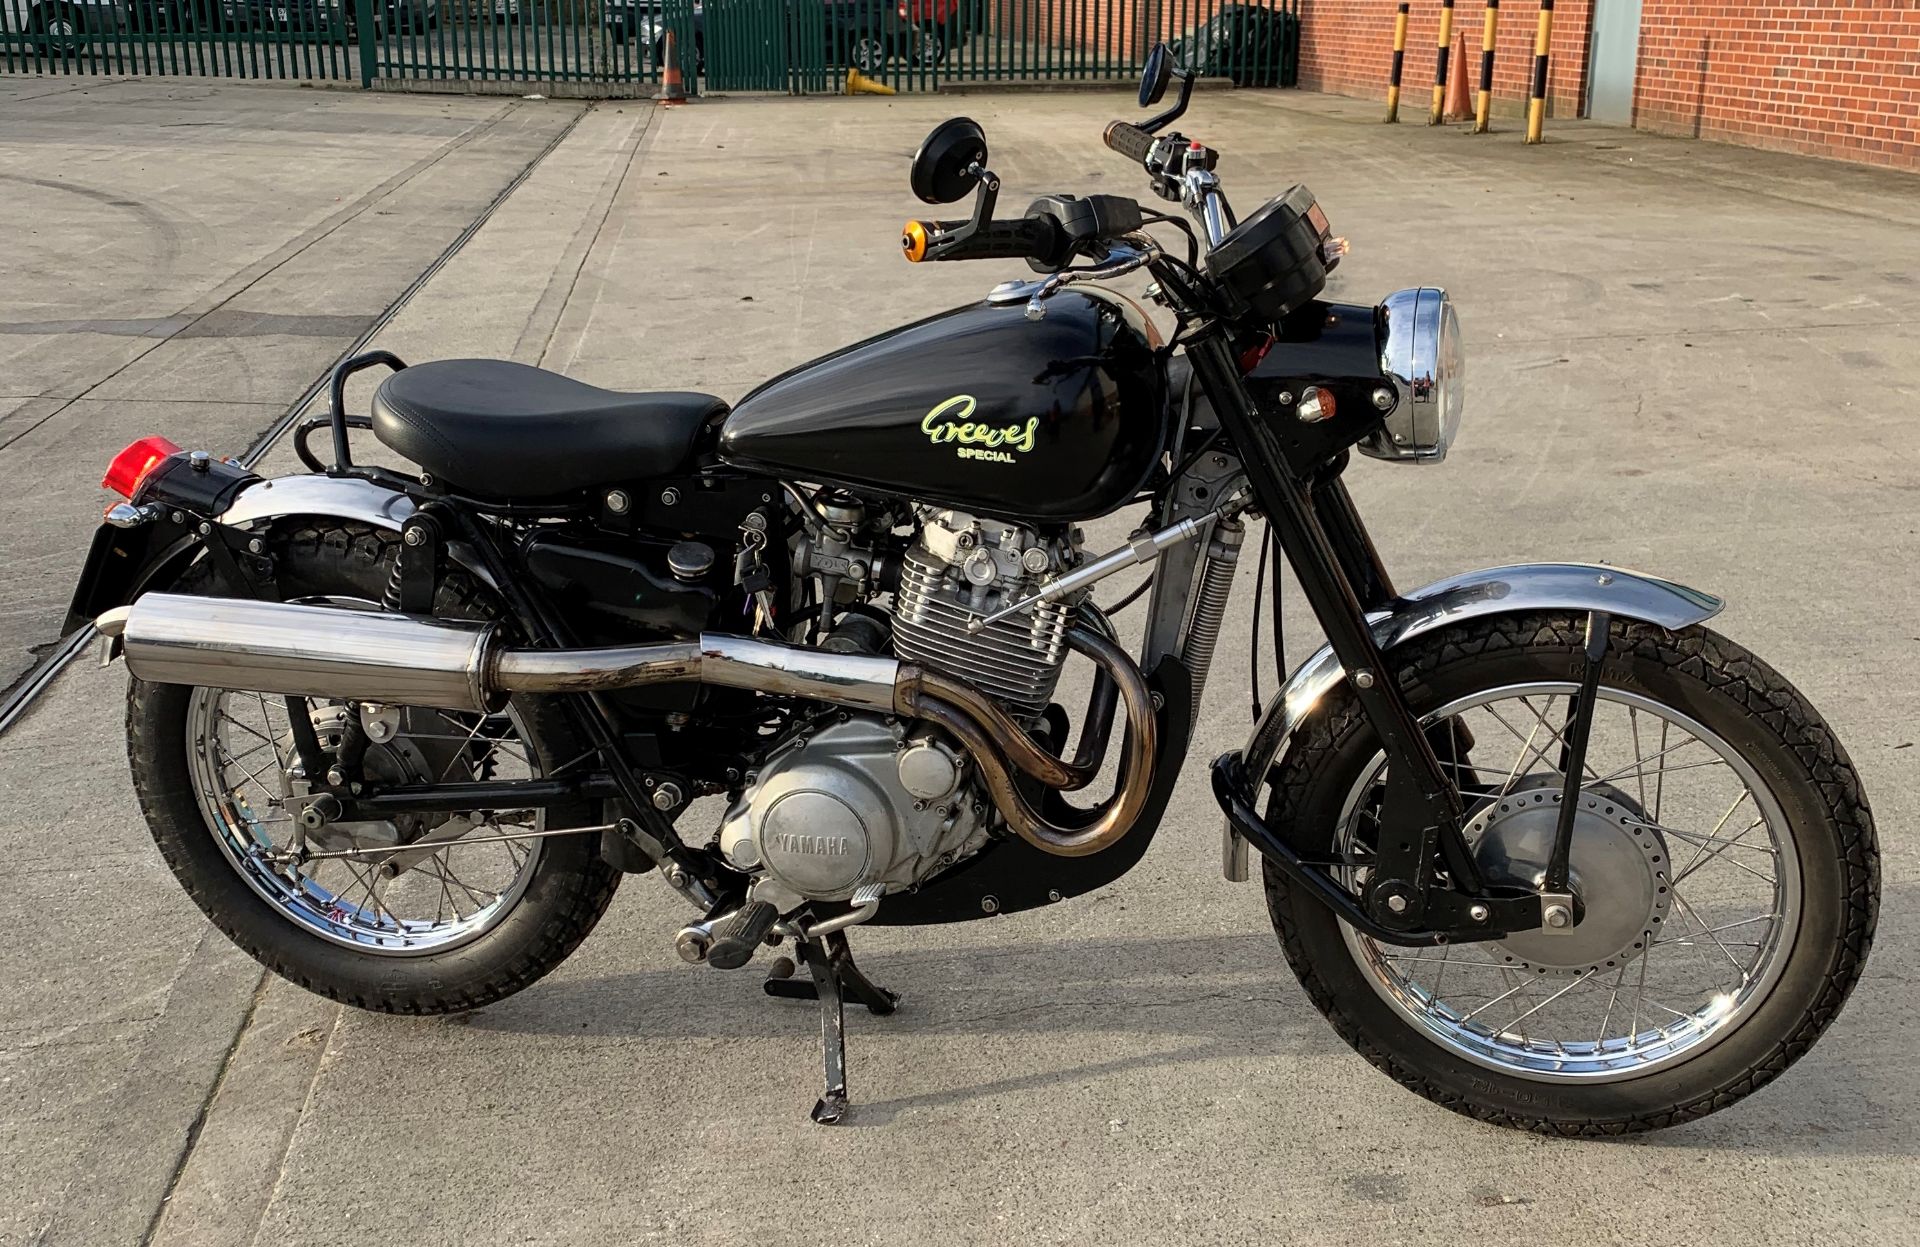 MOTORBIKE - 1961 GREEVES BMC Special - totally rebuilt and fitted with a Yamaha XT 600 engine -